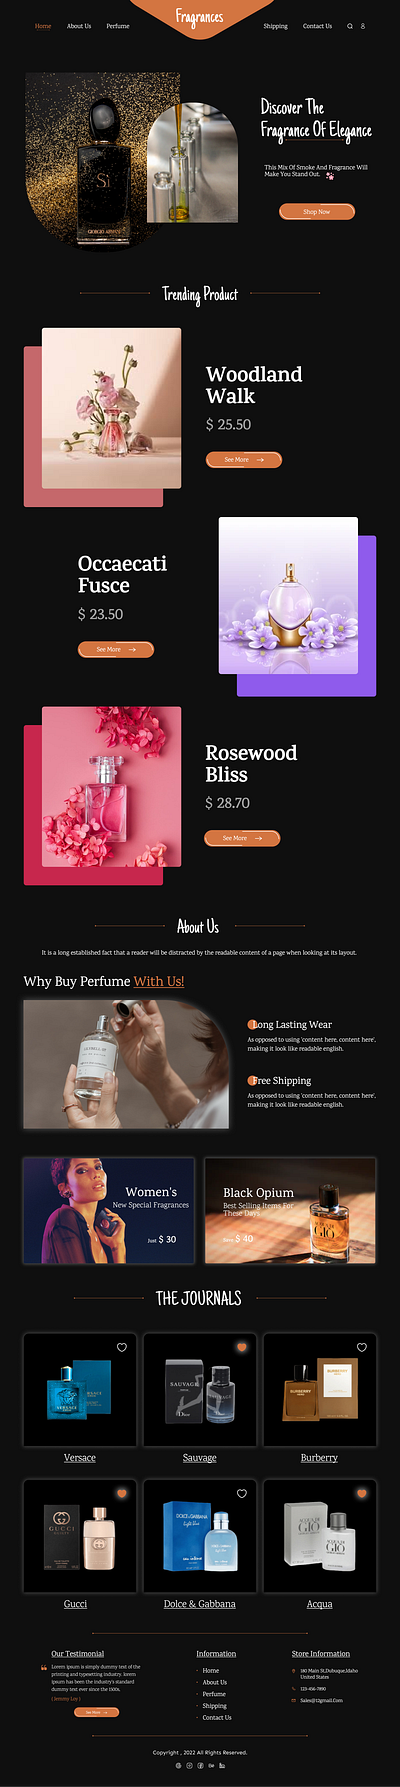 Luxury Fine Fragrances Story! android app beauty branding designing development ecommerce fasion fragrances graphic design ios lady mobile perfume react shopify shopifyapp vector web woo commerce